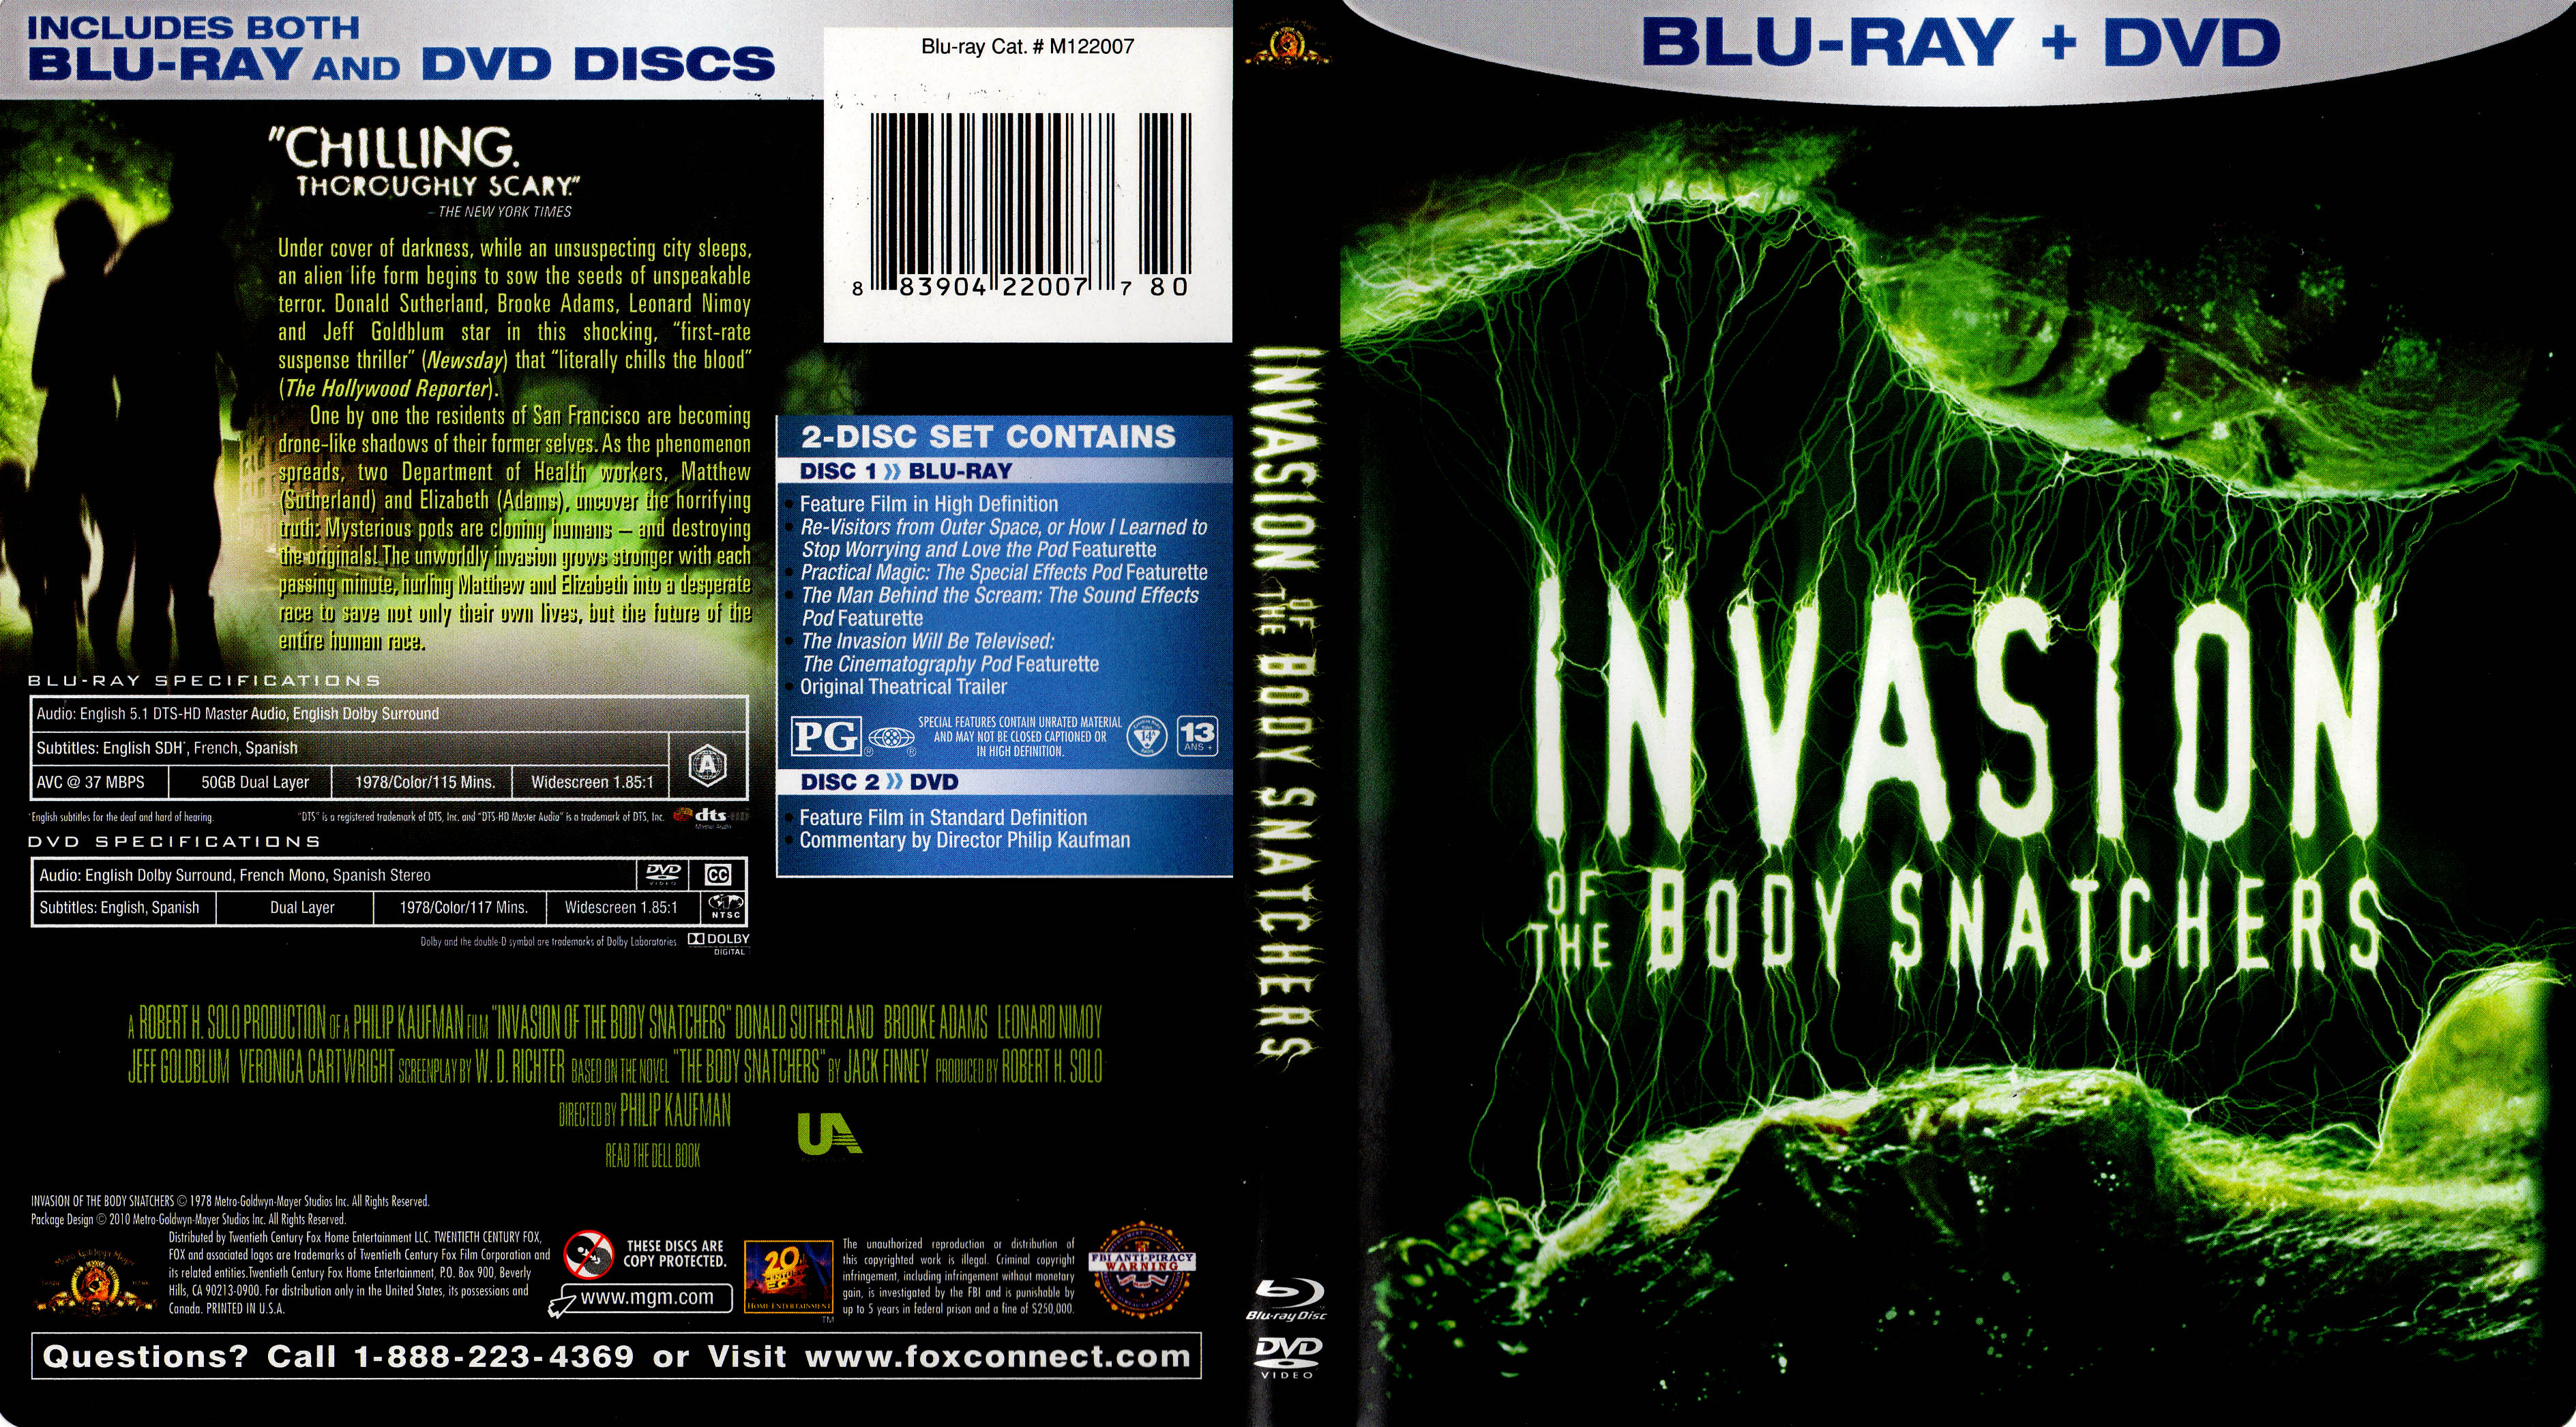 Jaquette DVD Invasion of the body snatchers  - L